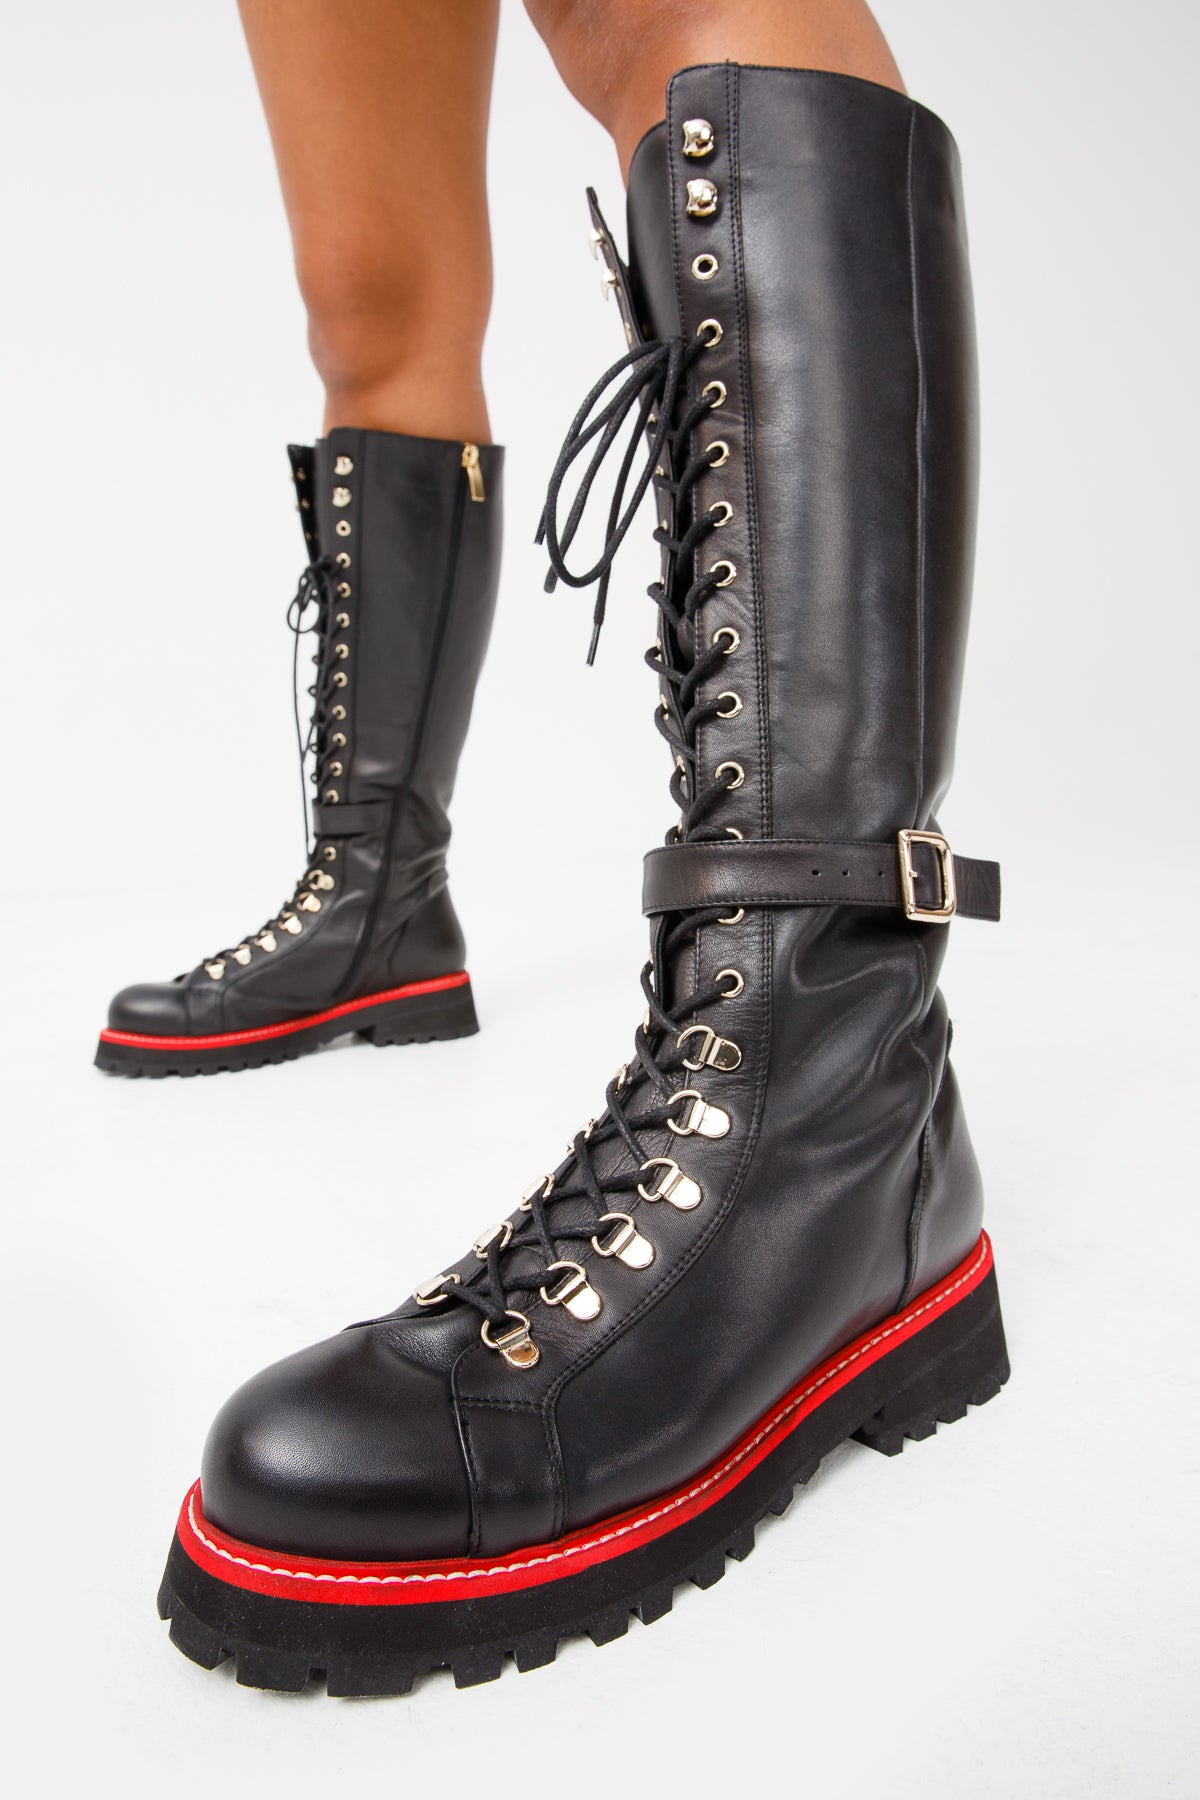 The Istinye Black Leather Knee High Lace-Up Women Boot Limited Edition